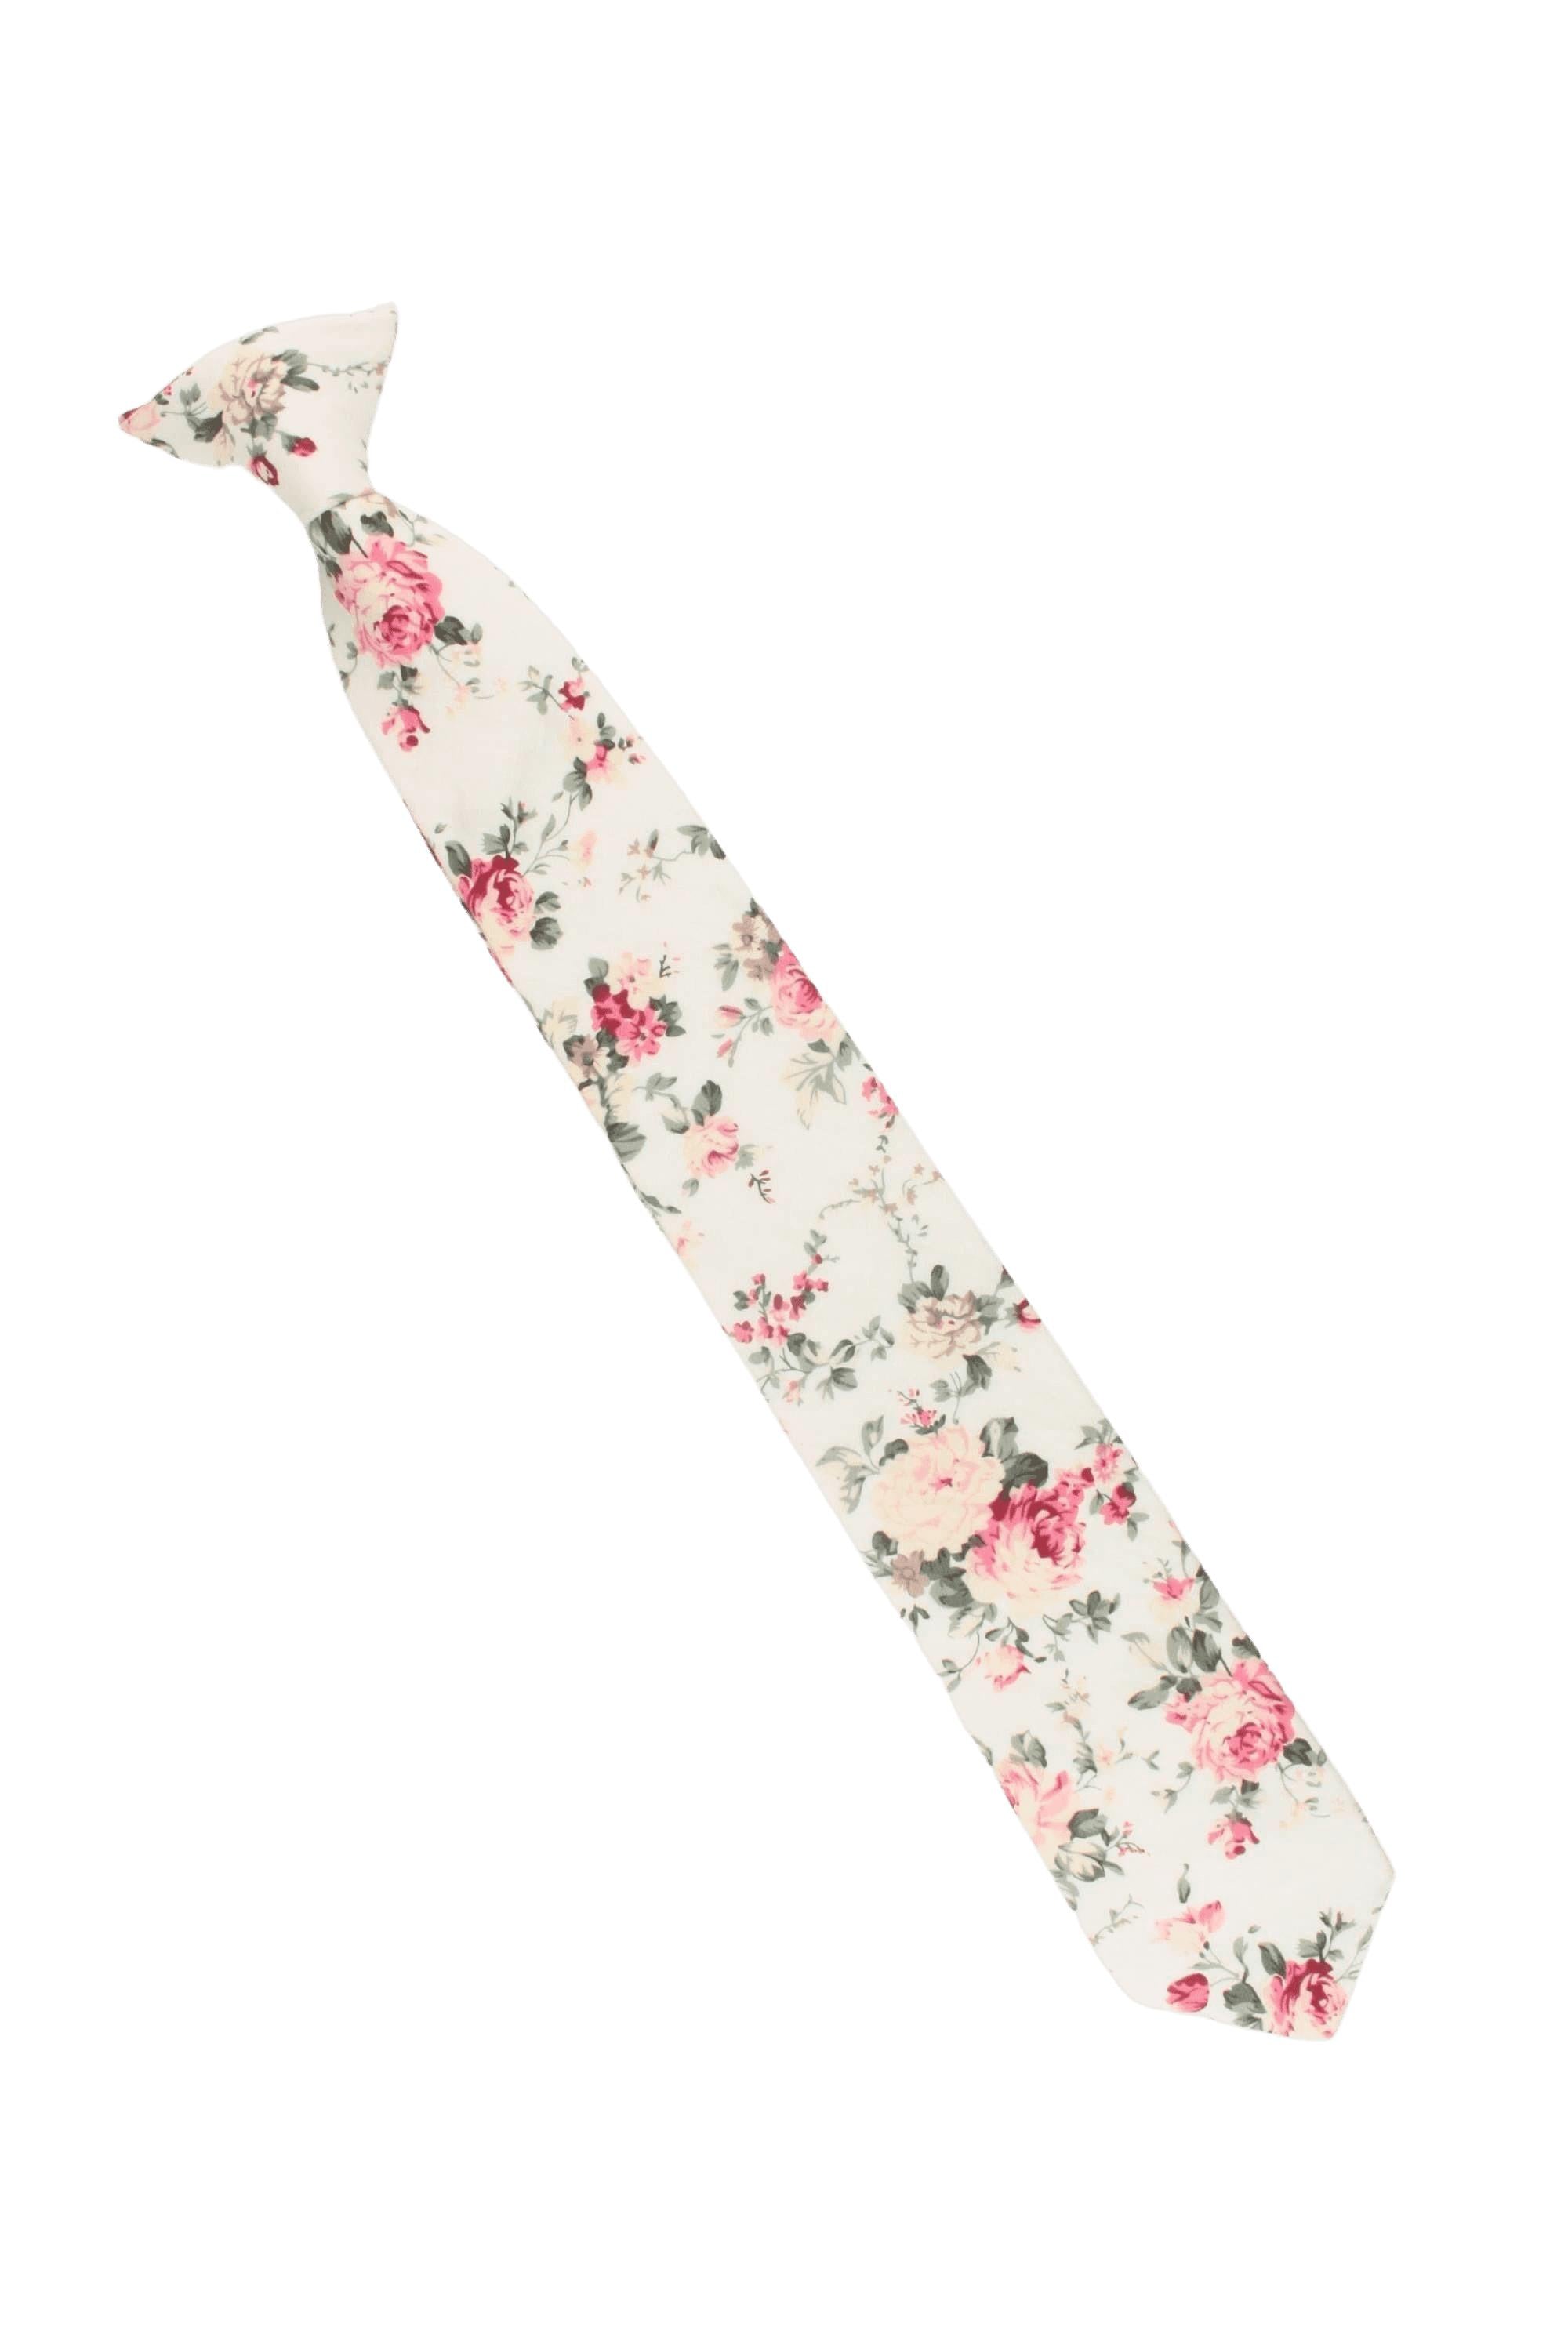 Cream Off White Boys and Toddlers Floral Skinny Tie 2.36” EMMETT MYTIESHOP-Cream Off White Boys and Toddlers Floral Skinny Tie Material:Cotton Approx Size: 57"(145cm) in the length ;2.36"(6cm) in the width 3 sizes available Color: More cream than Offwhite Celebrate life's little moments with this floral tie for kids. Mytiehop's Emmett Cream Floral Skinny Clip on Ties are perfect for adding a touch of whimsy to any special occasion. Whether your little one is the ring bearer at a wedding or simpl